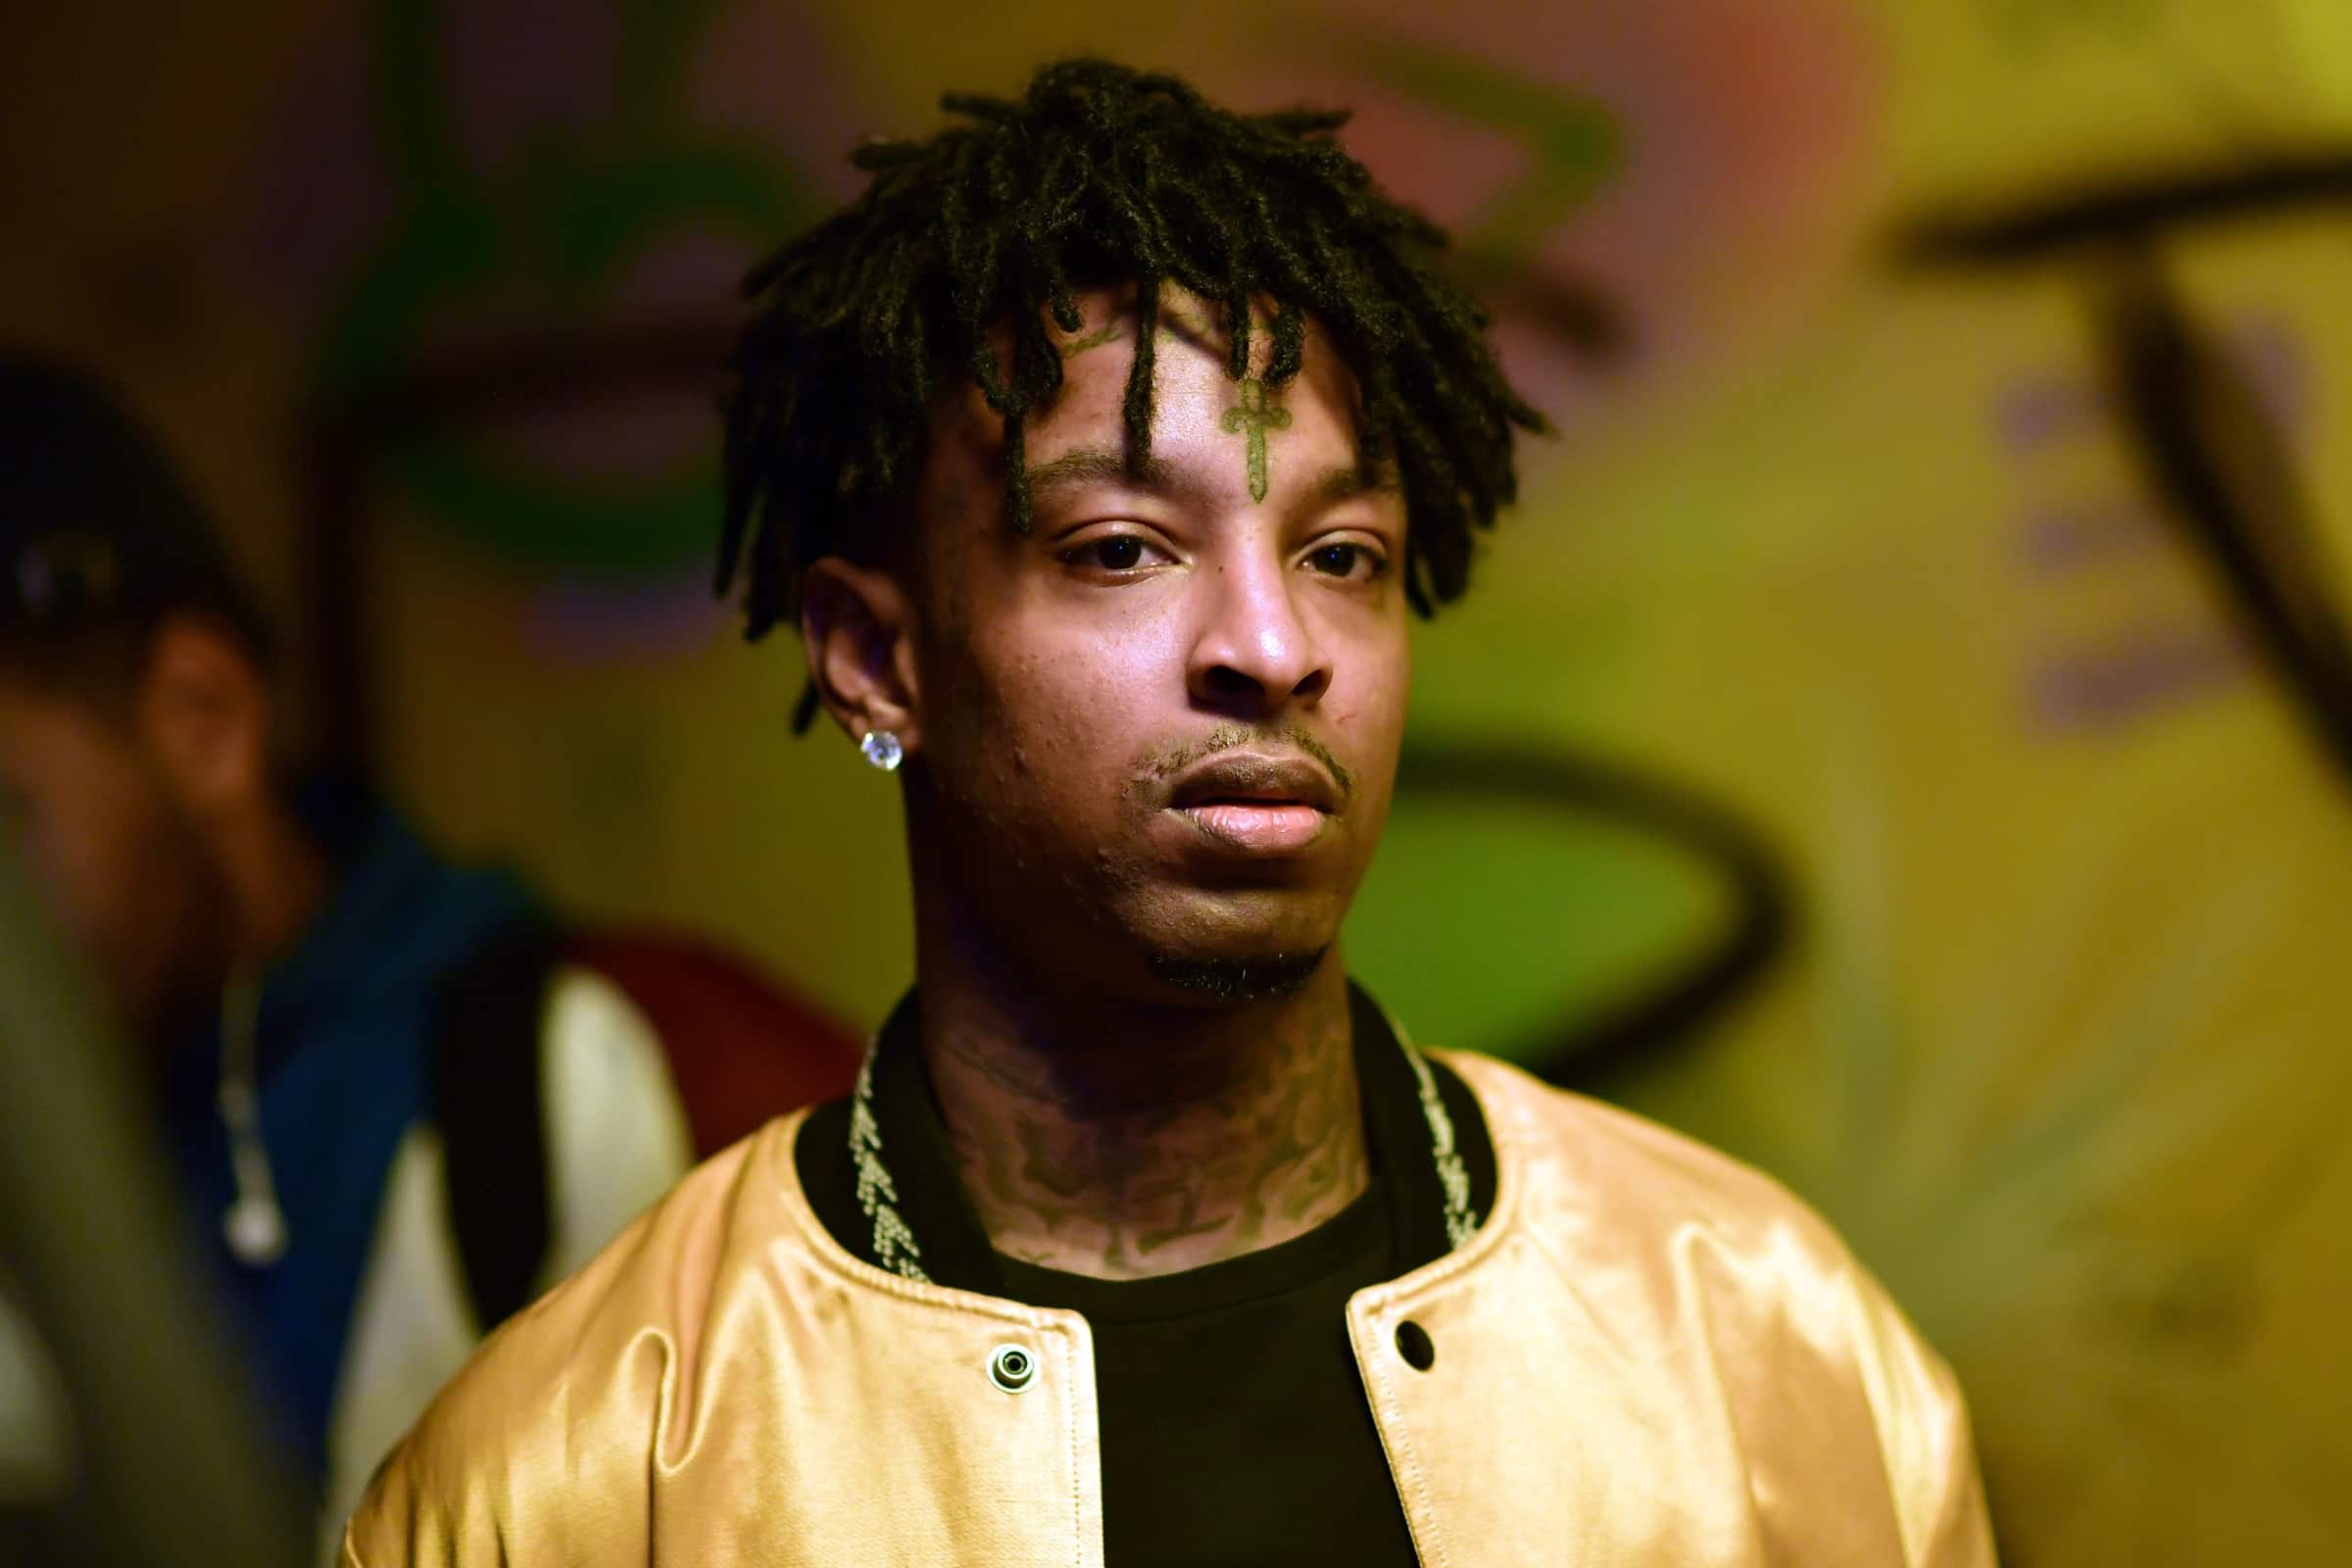 What Is 21 Savage's Best-Selling Album?